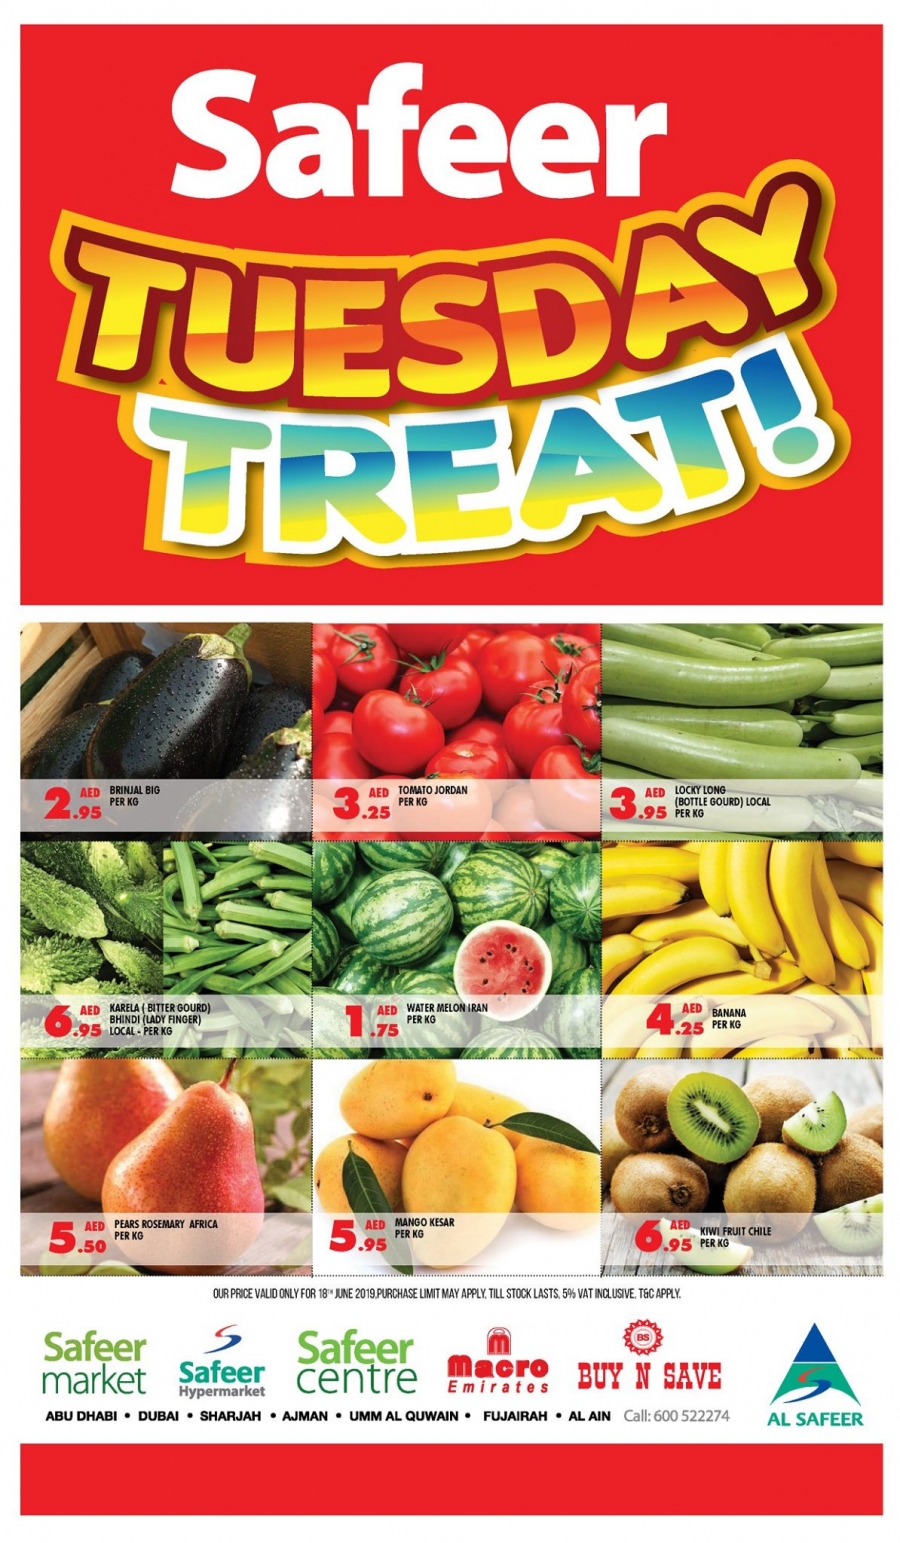 Safeer Tuesday Treat Offers